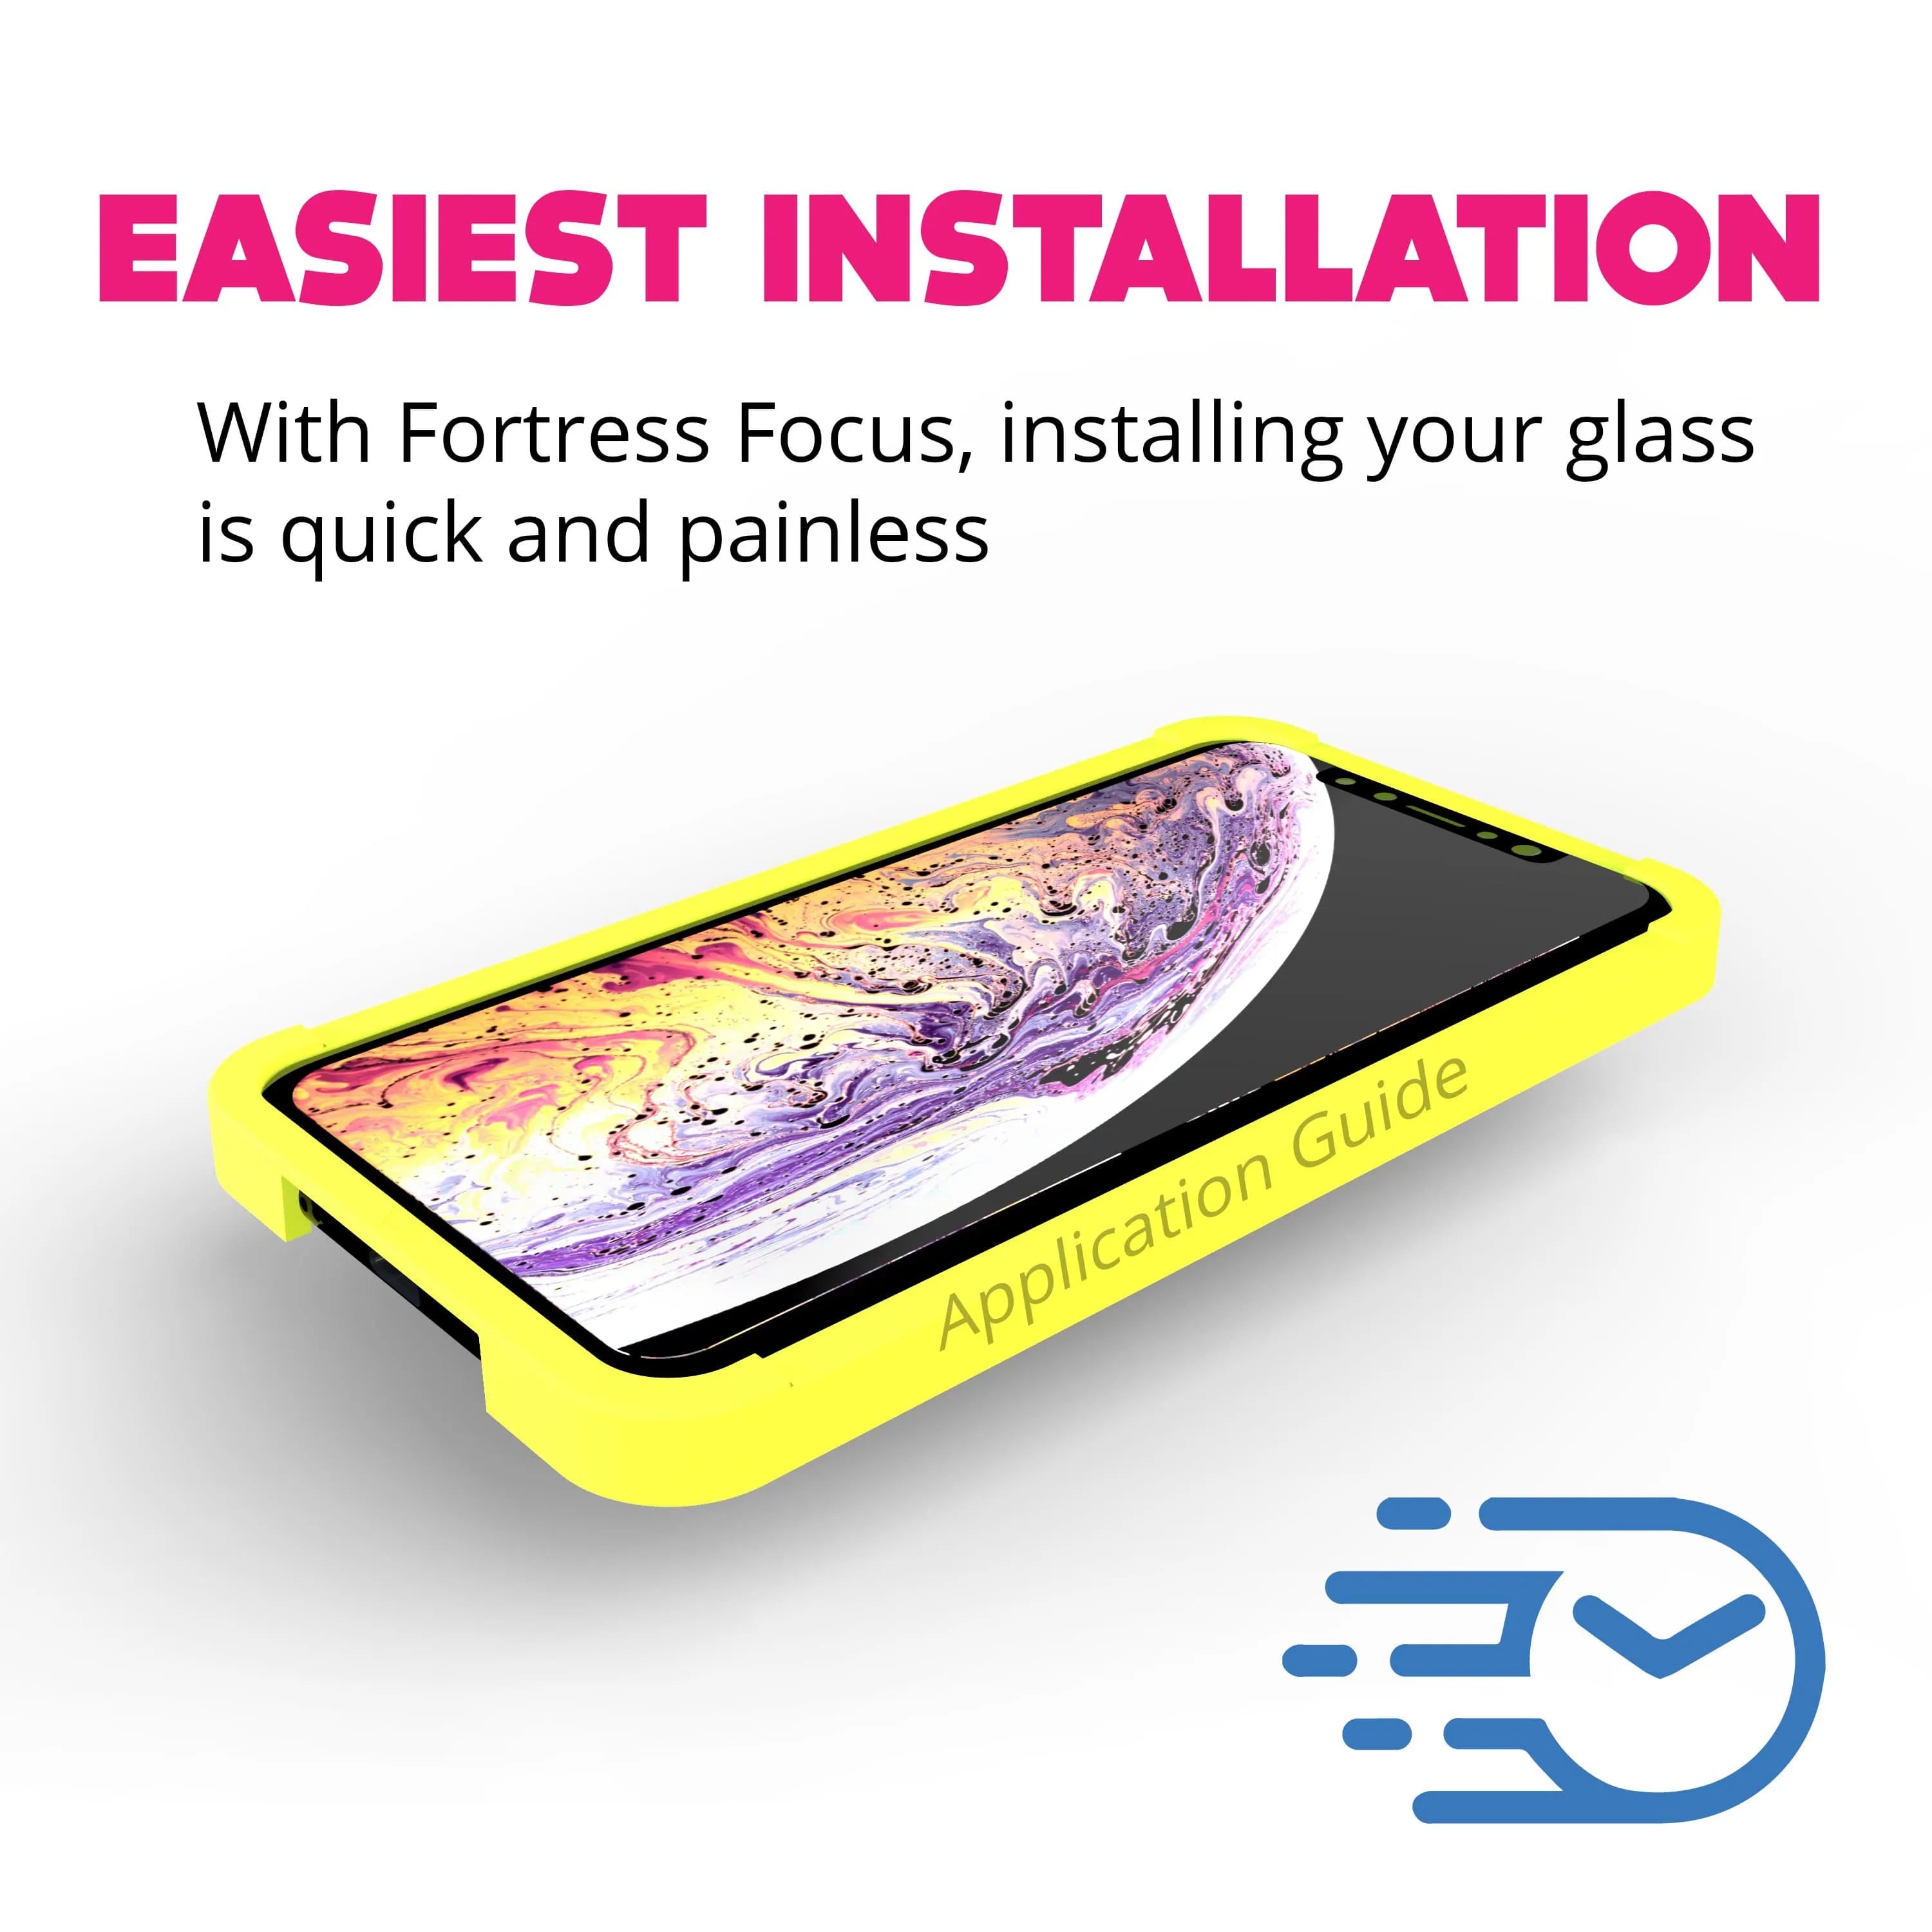 Fortress iPhone X Screen Protector - $200 Device Coverage  Scooch Screen Protector